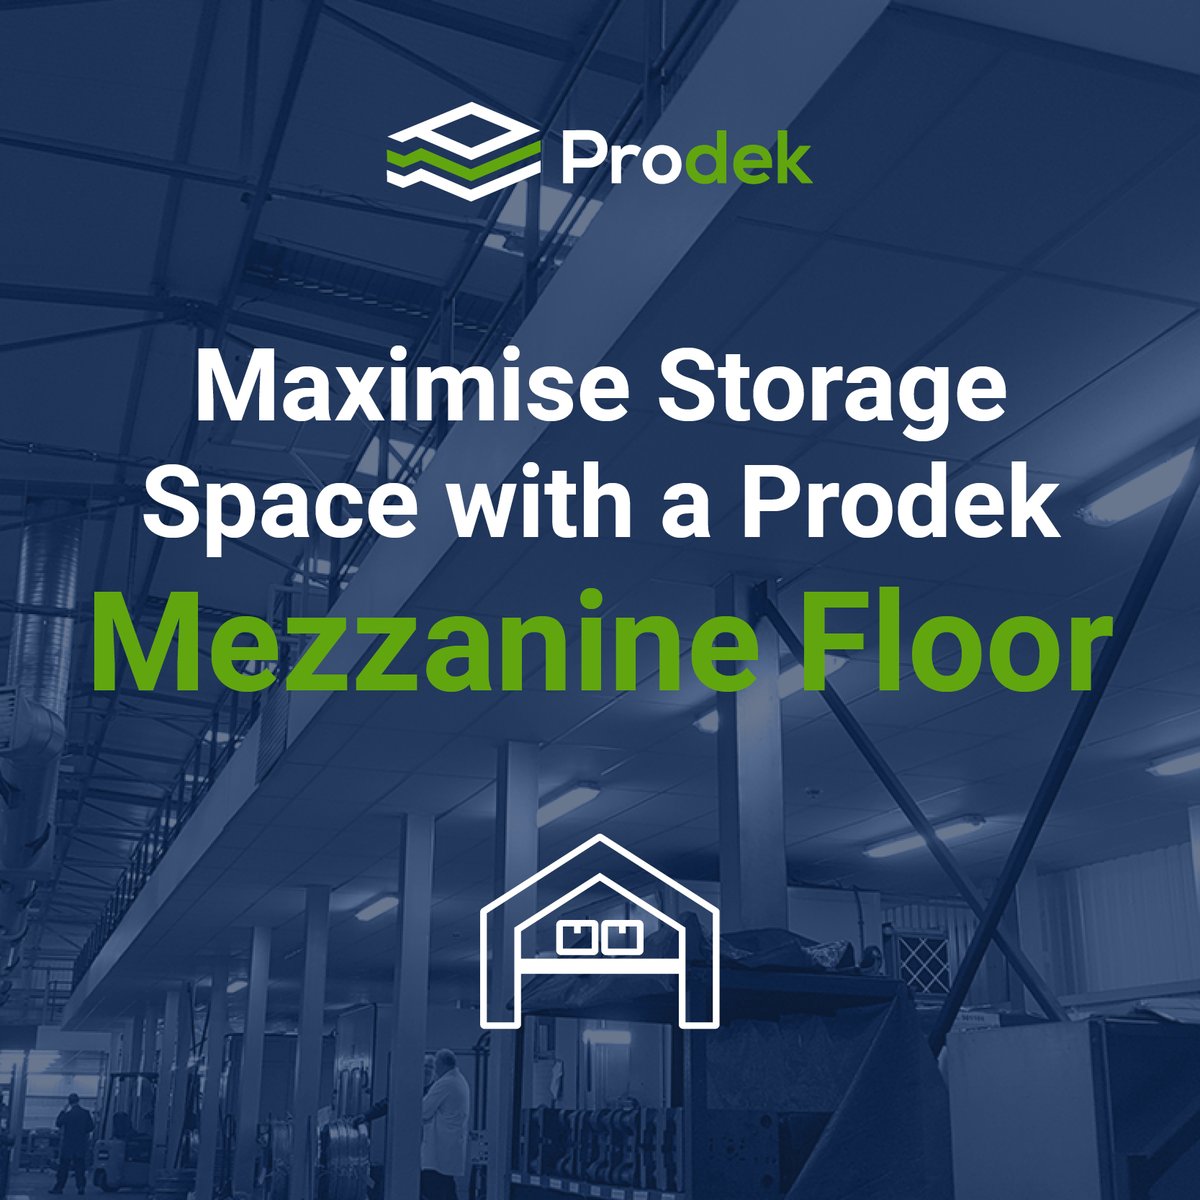 Our mezzanine floors are a low-cost solutions for space-efficiency, creating additional storage and workspaces for your business 🏗️ 

#mezzaninefloor #prodek #storagesolutions #storagesystems #sheffield #madeinsheffield